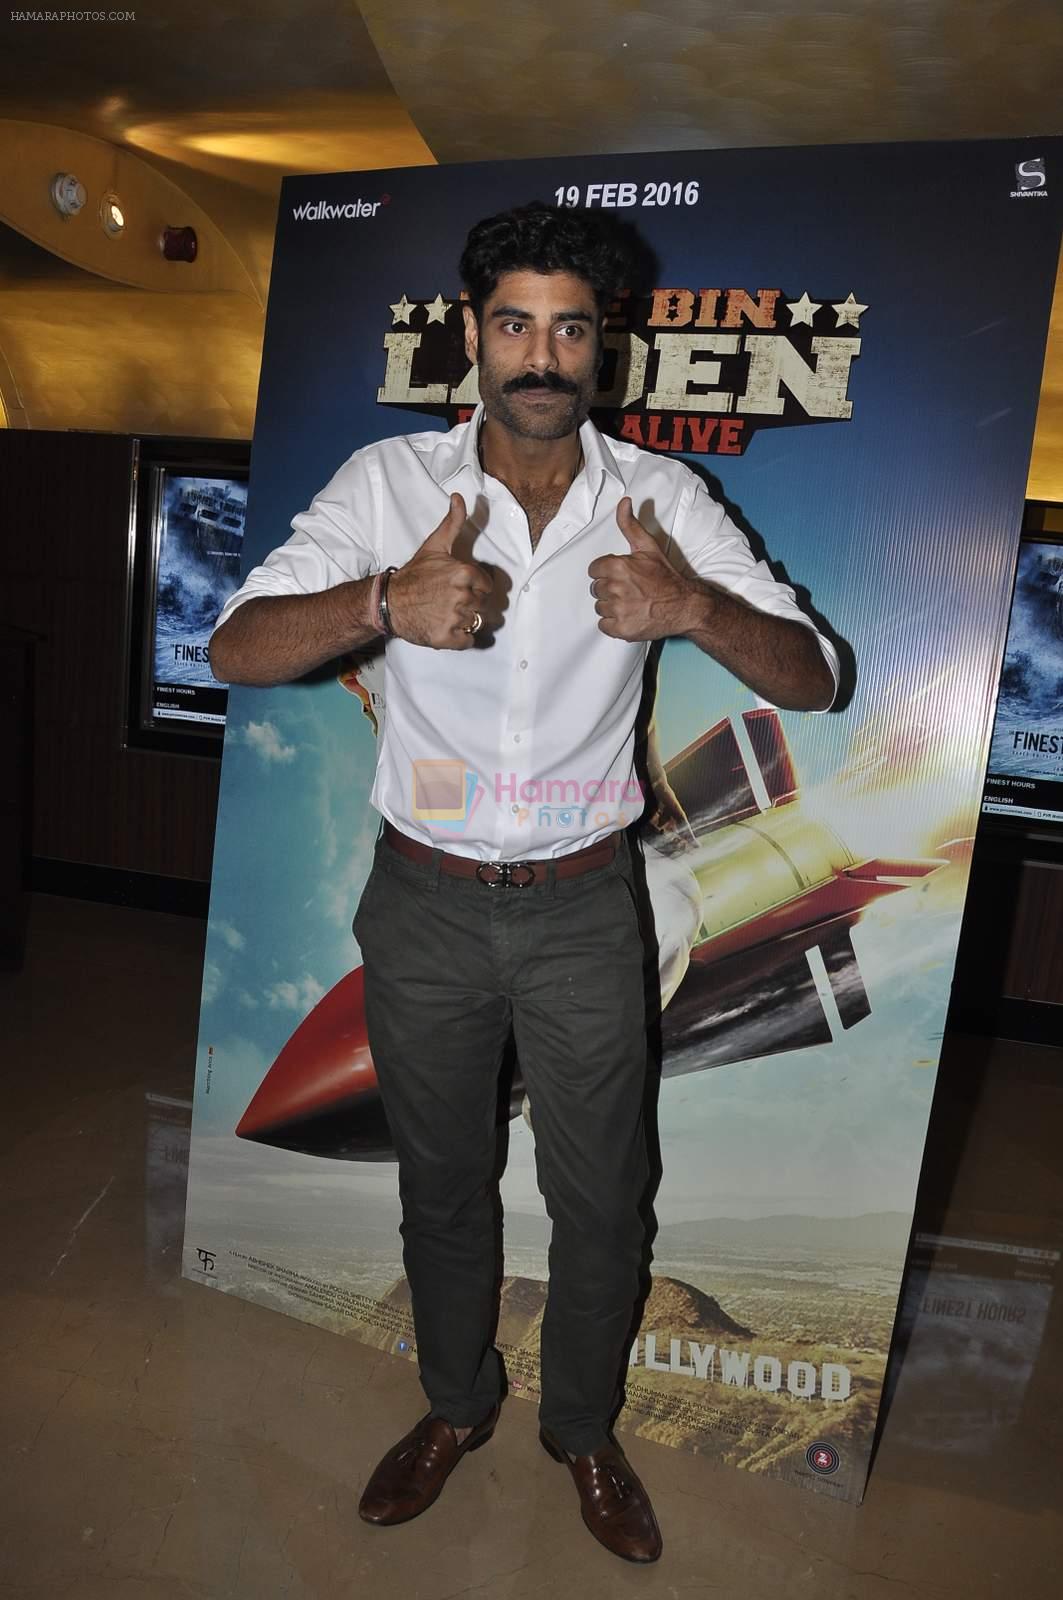 Sikander Kher at the trailor launch of Tere Bin Laden Dead or Alive on 19th Jan 2016